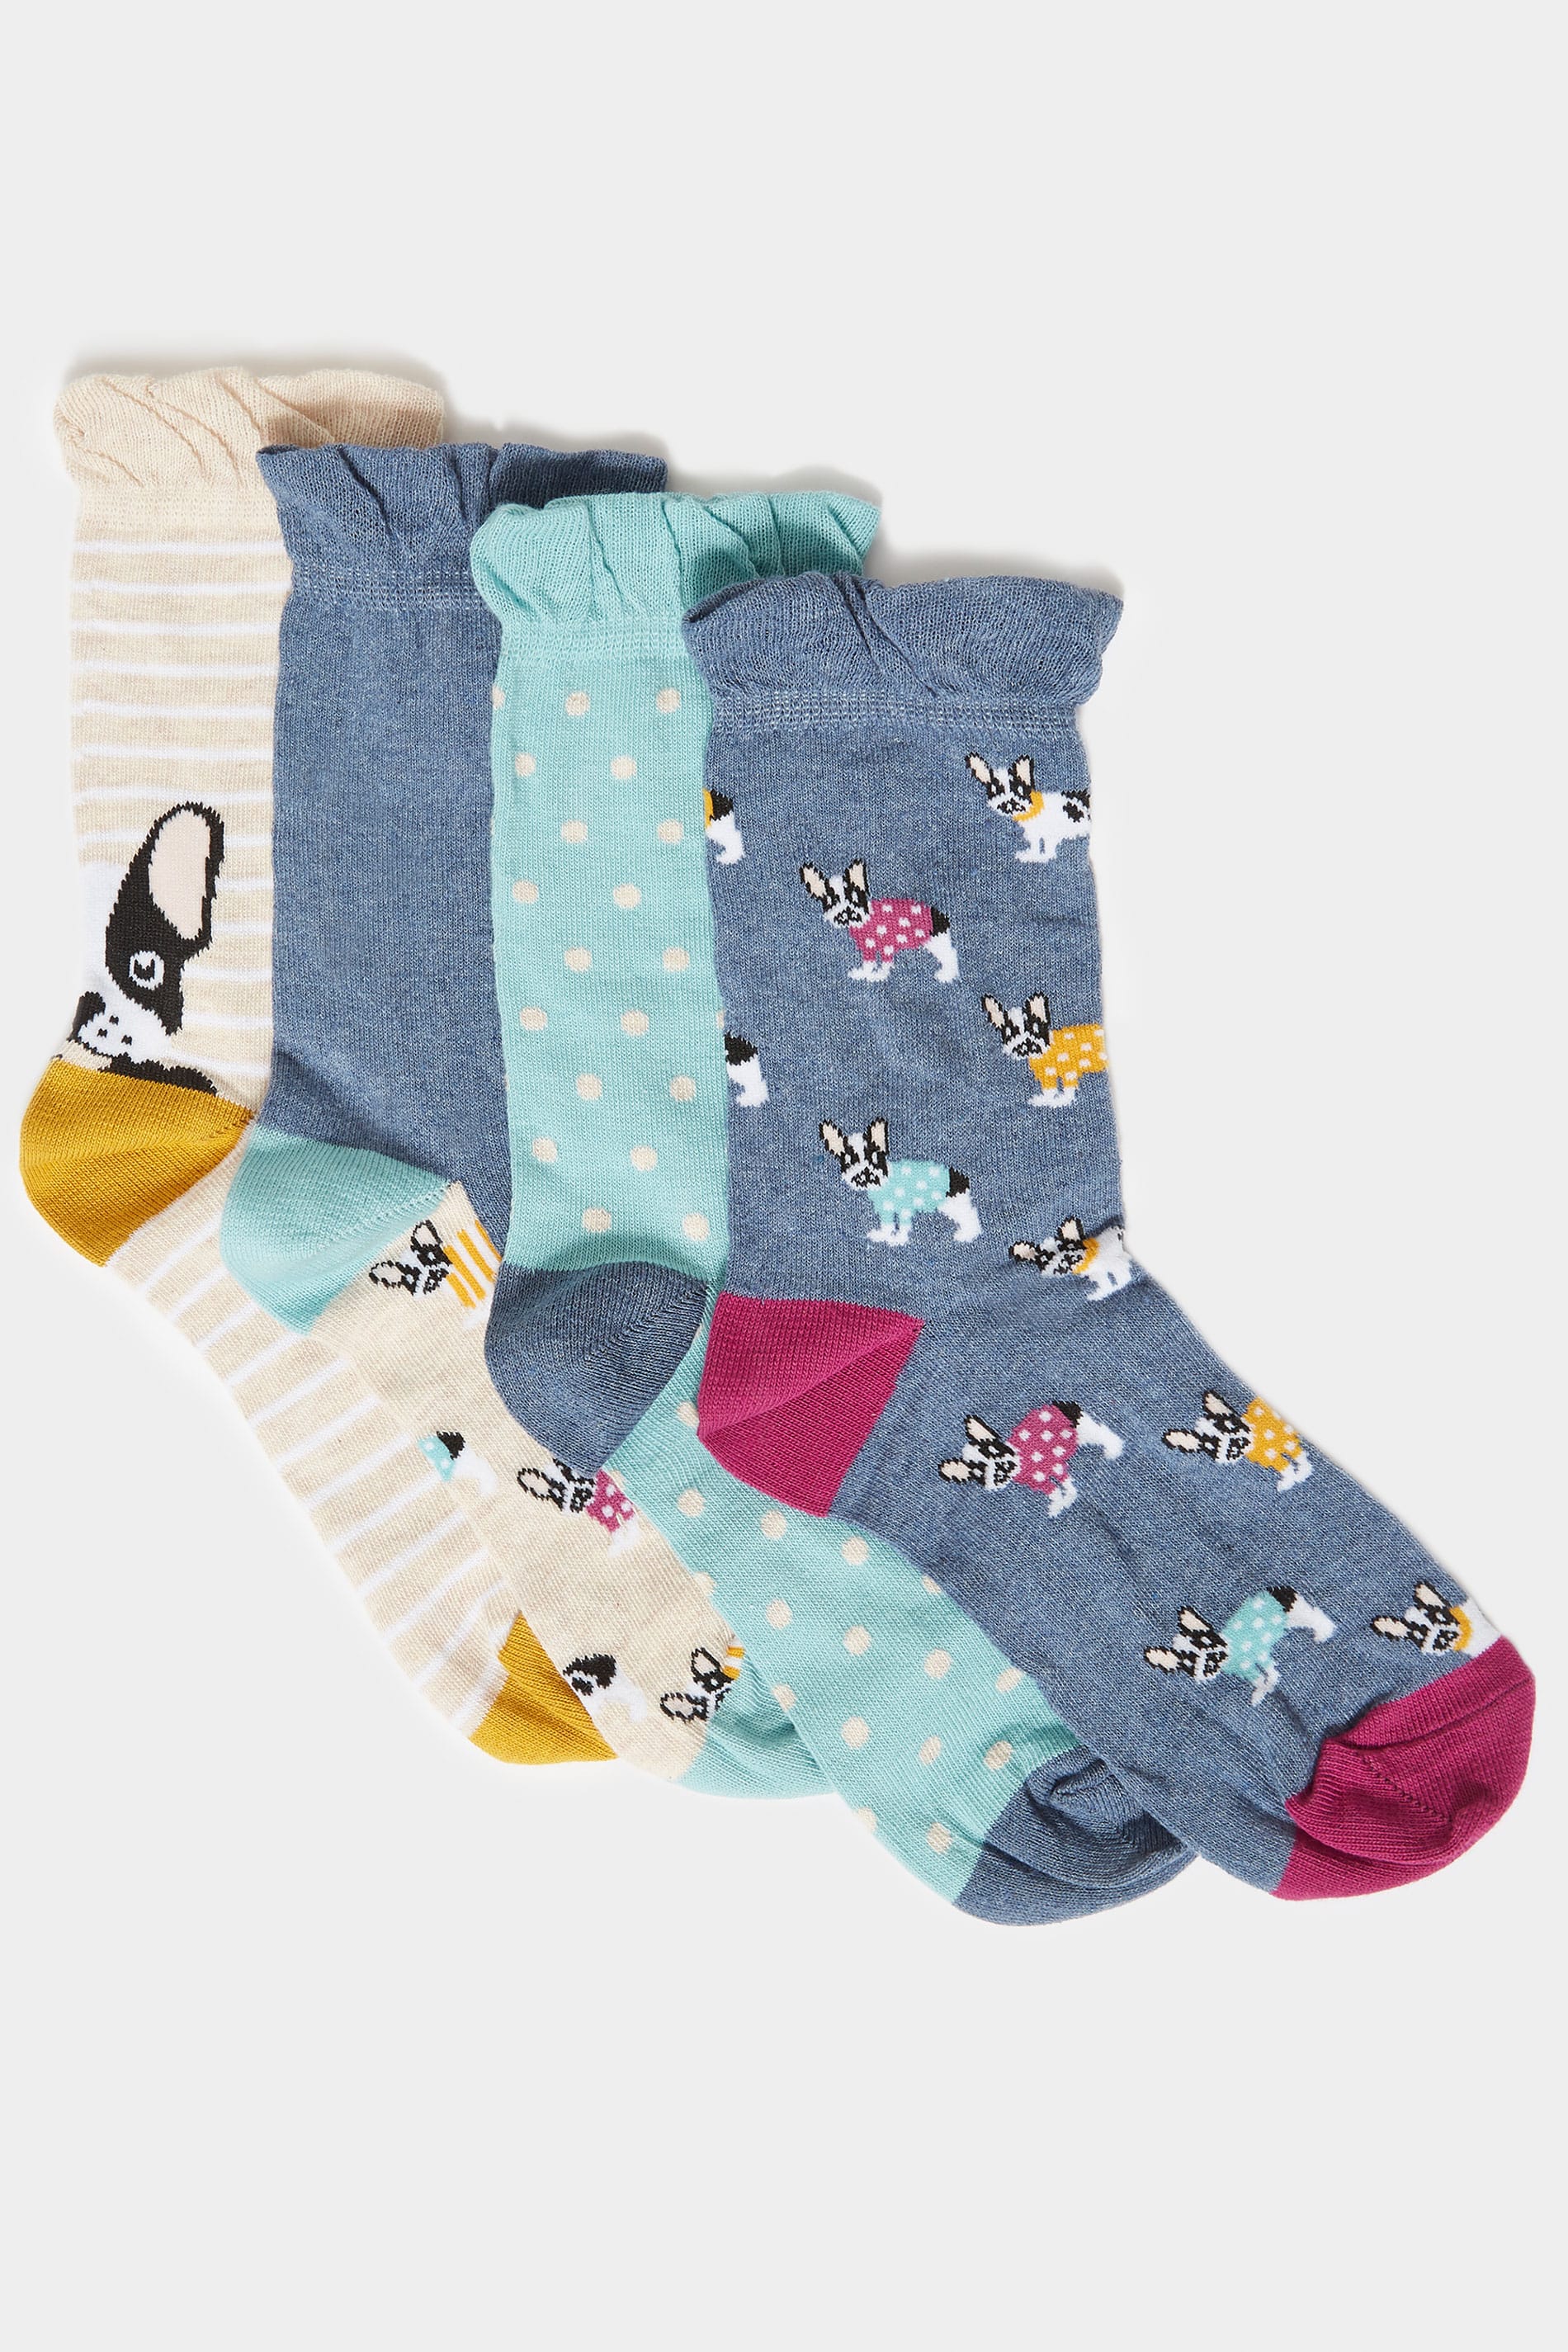 4 PACK Blue Assorted Dog Socks | Yours Clothing